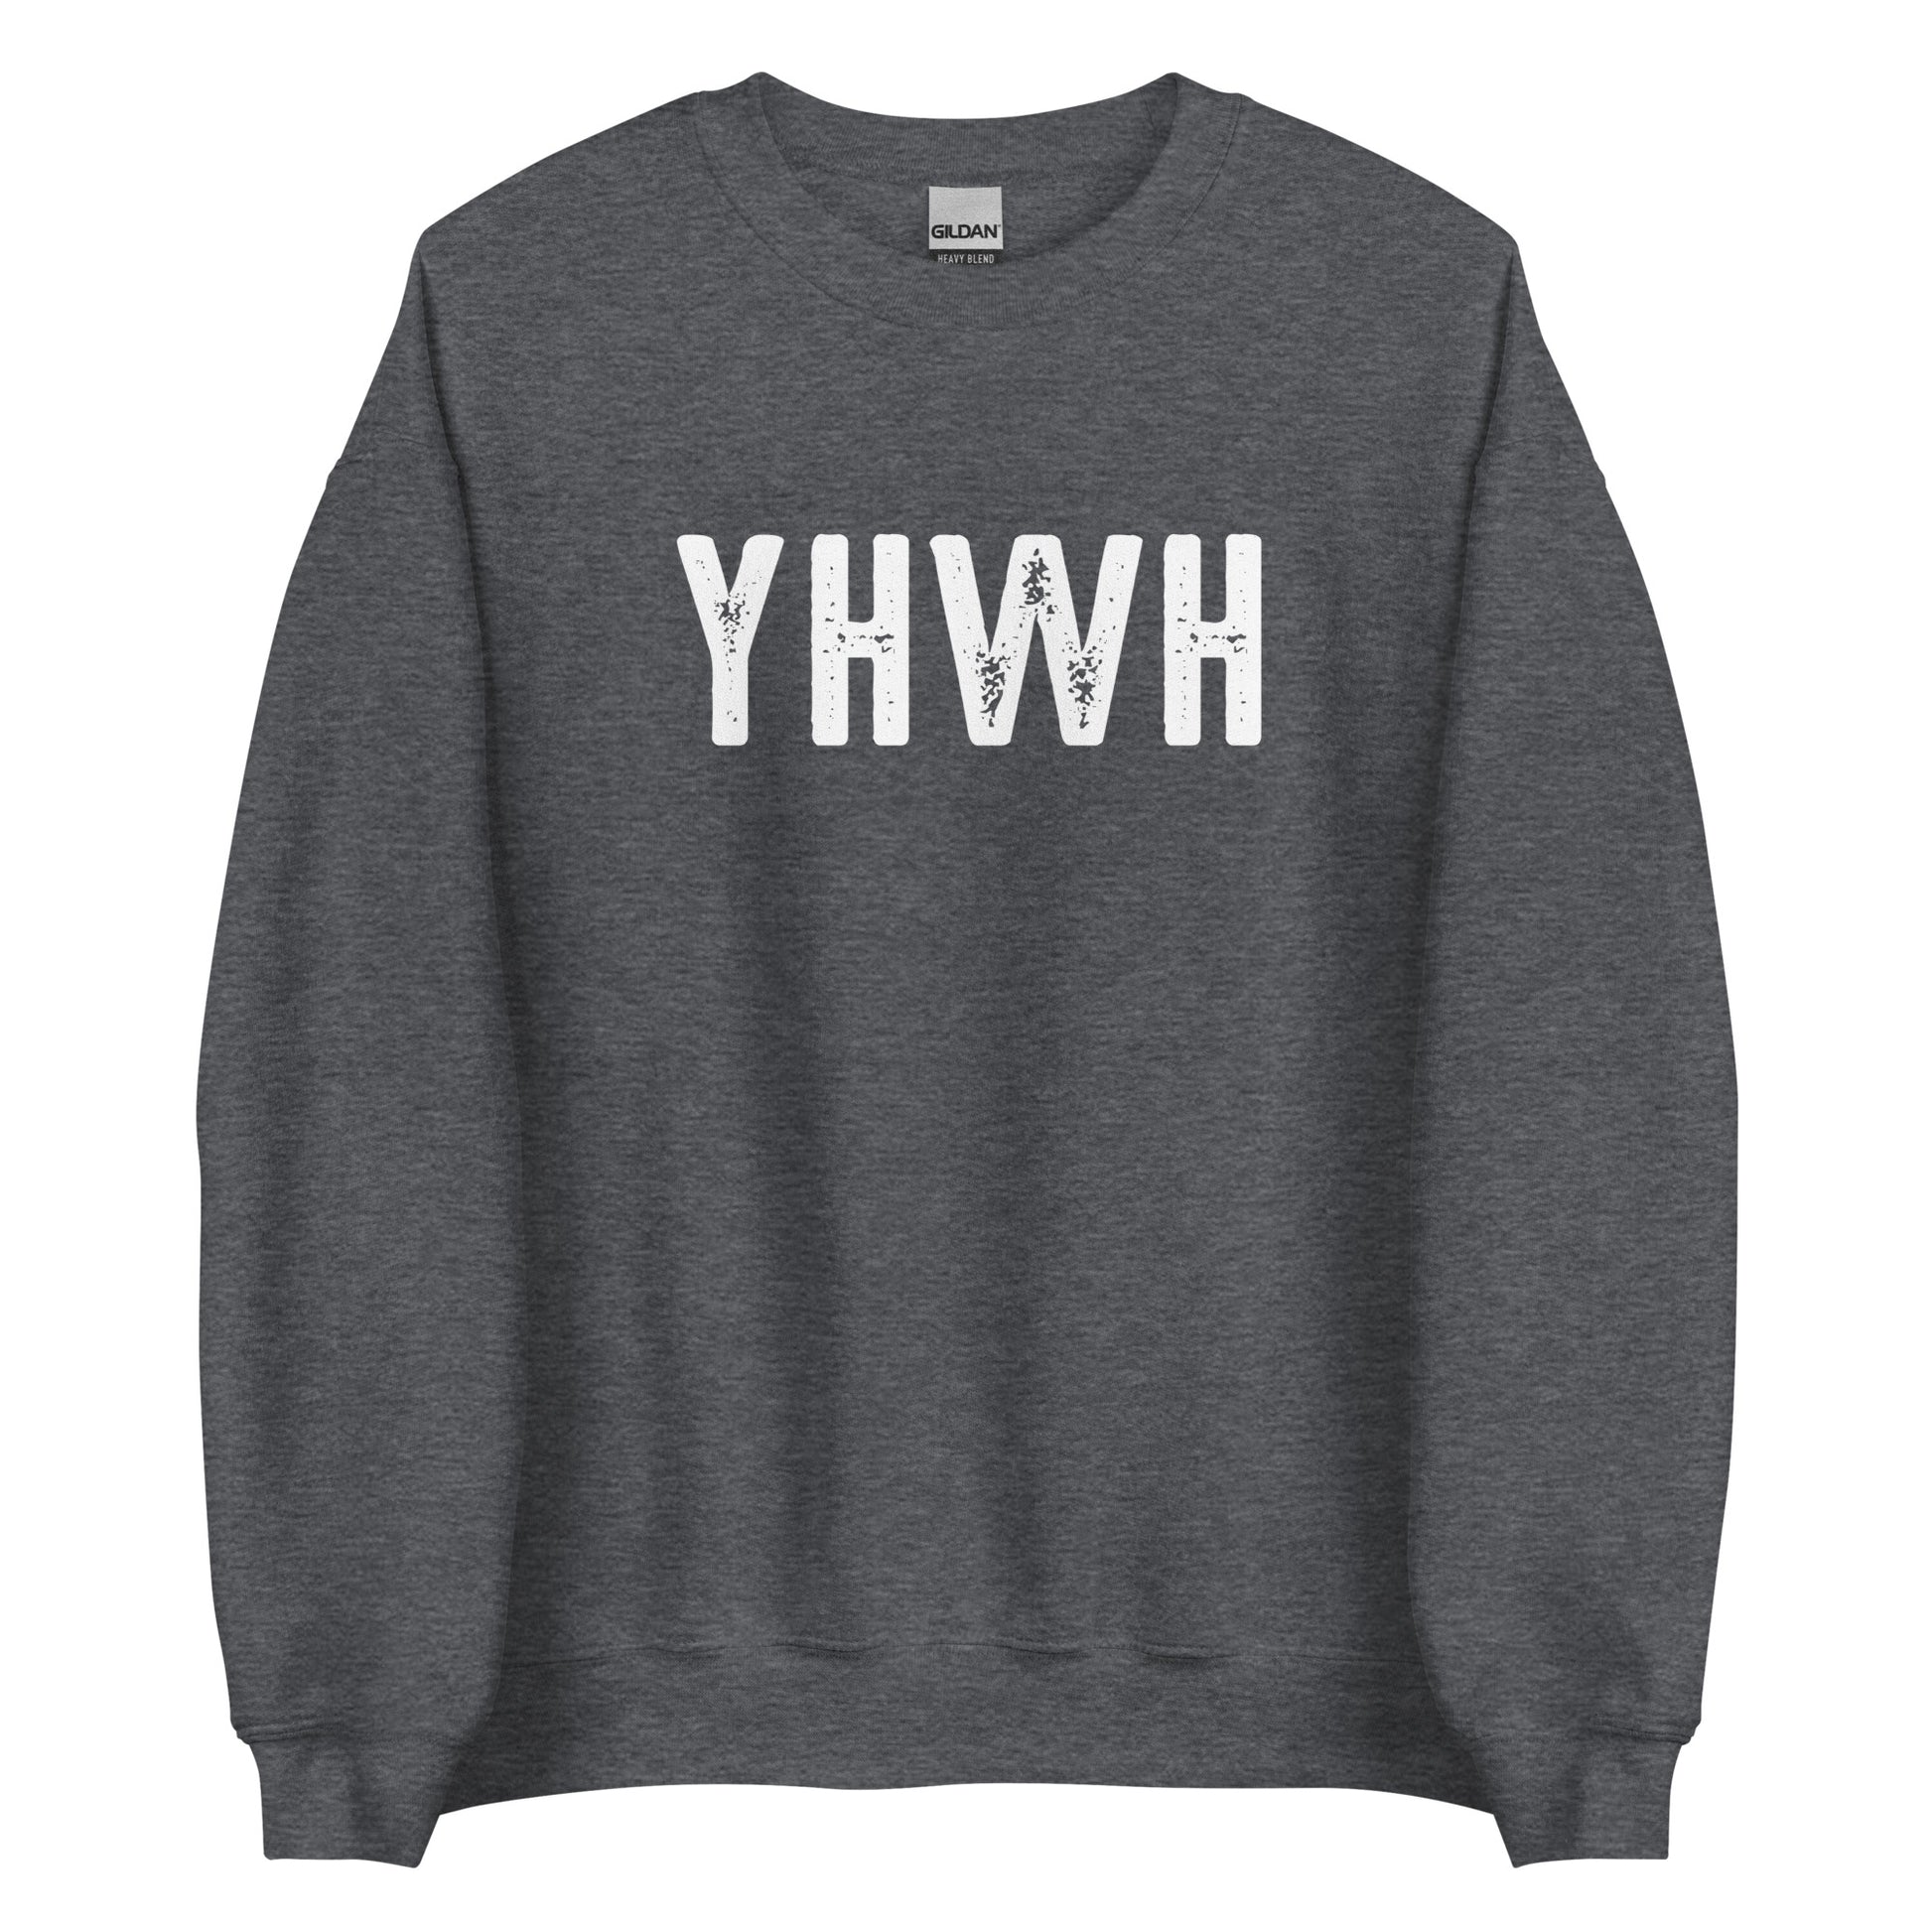 YHWH Hebrew Biblical Name of God Yahweh Christian aesthetic distressed design printed in white on cozy heather dark gray unisex crewneck sweatshirt for men and women